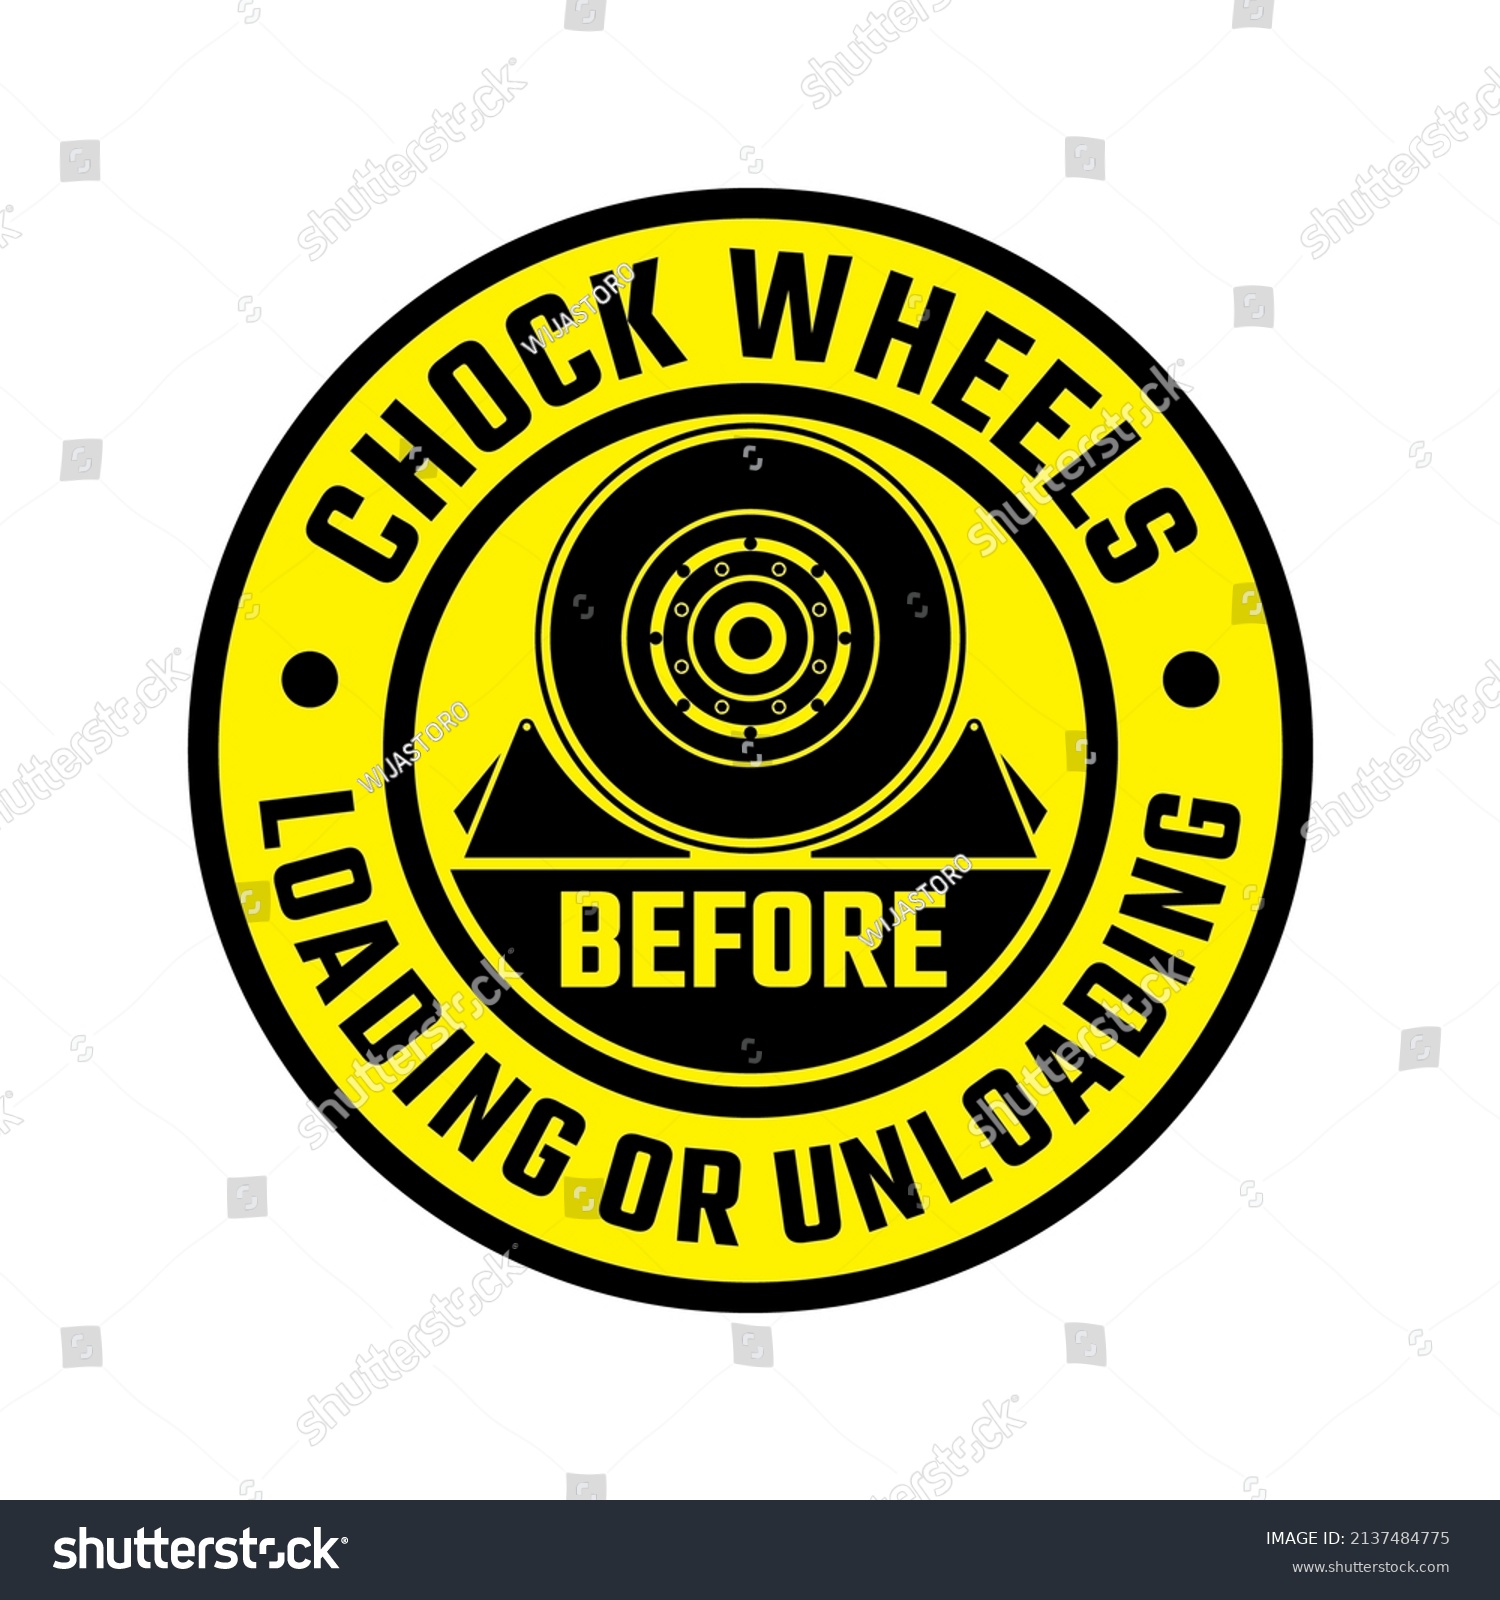 SVG of Chock wheels before loading or unloading rounded yellow color sign safety rules for vehicle. Sticker and label design vector template. Industrial and manufacturing. svg